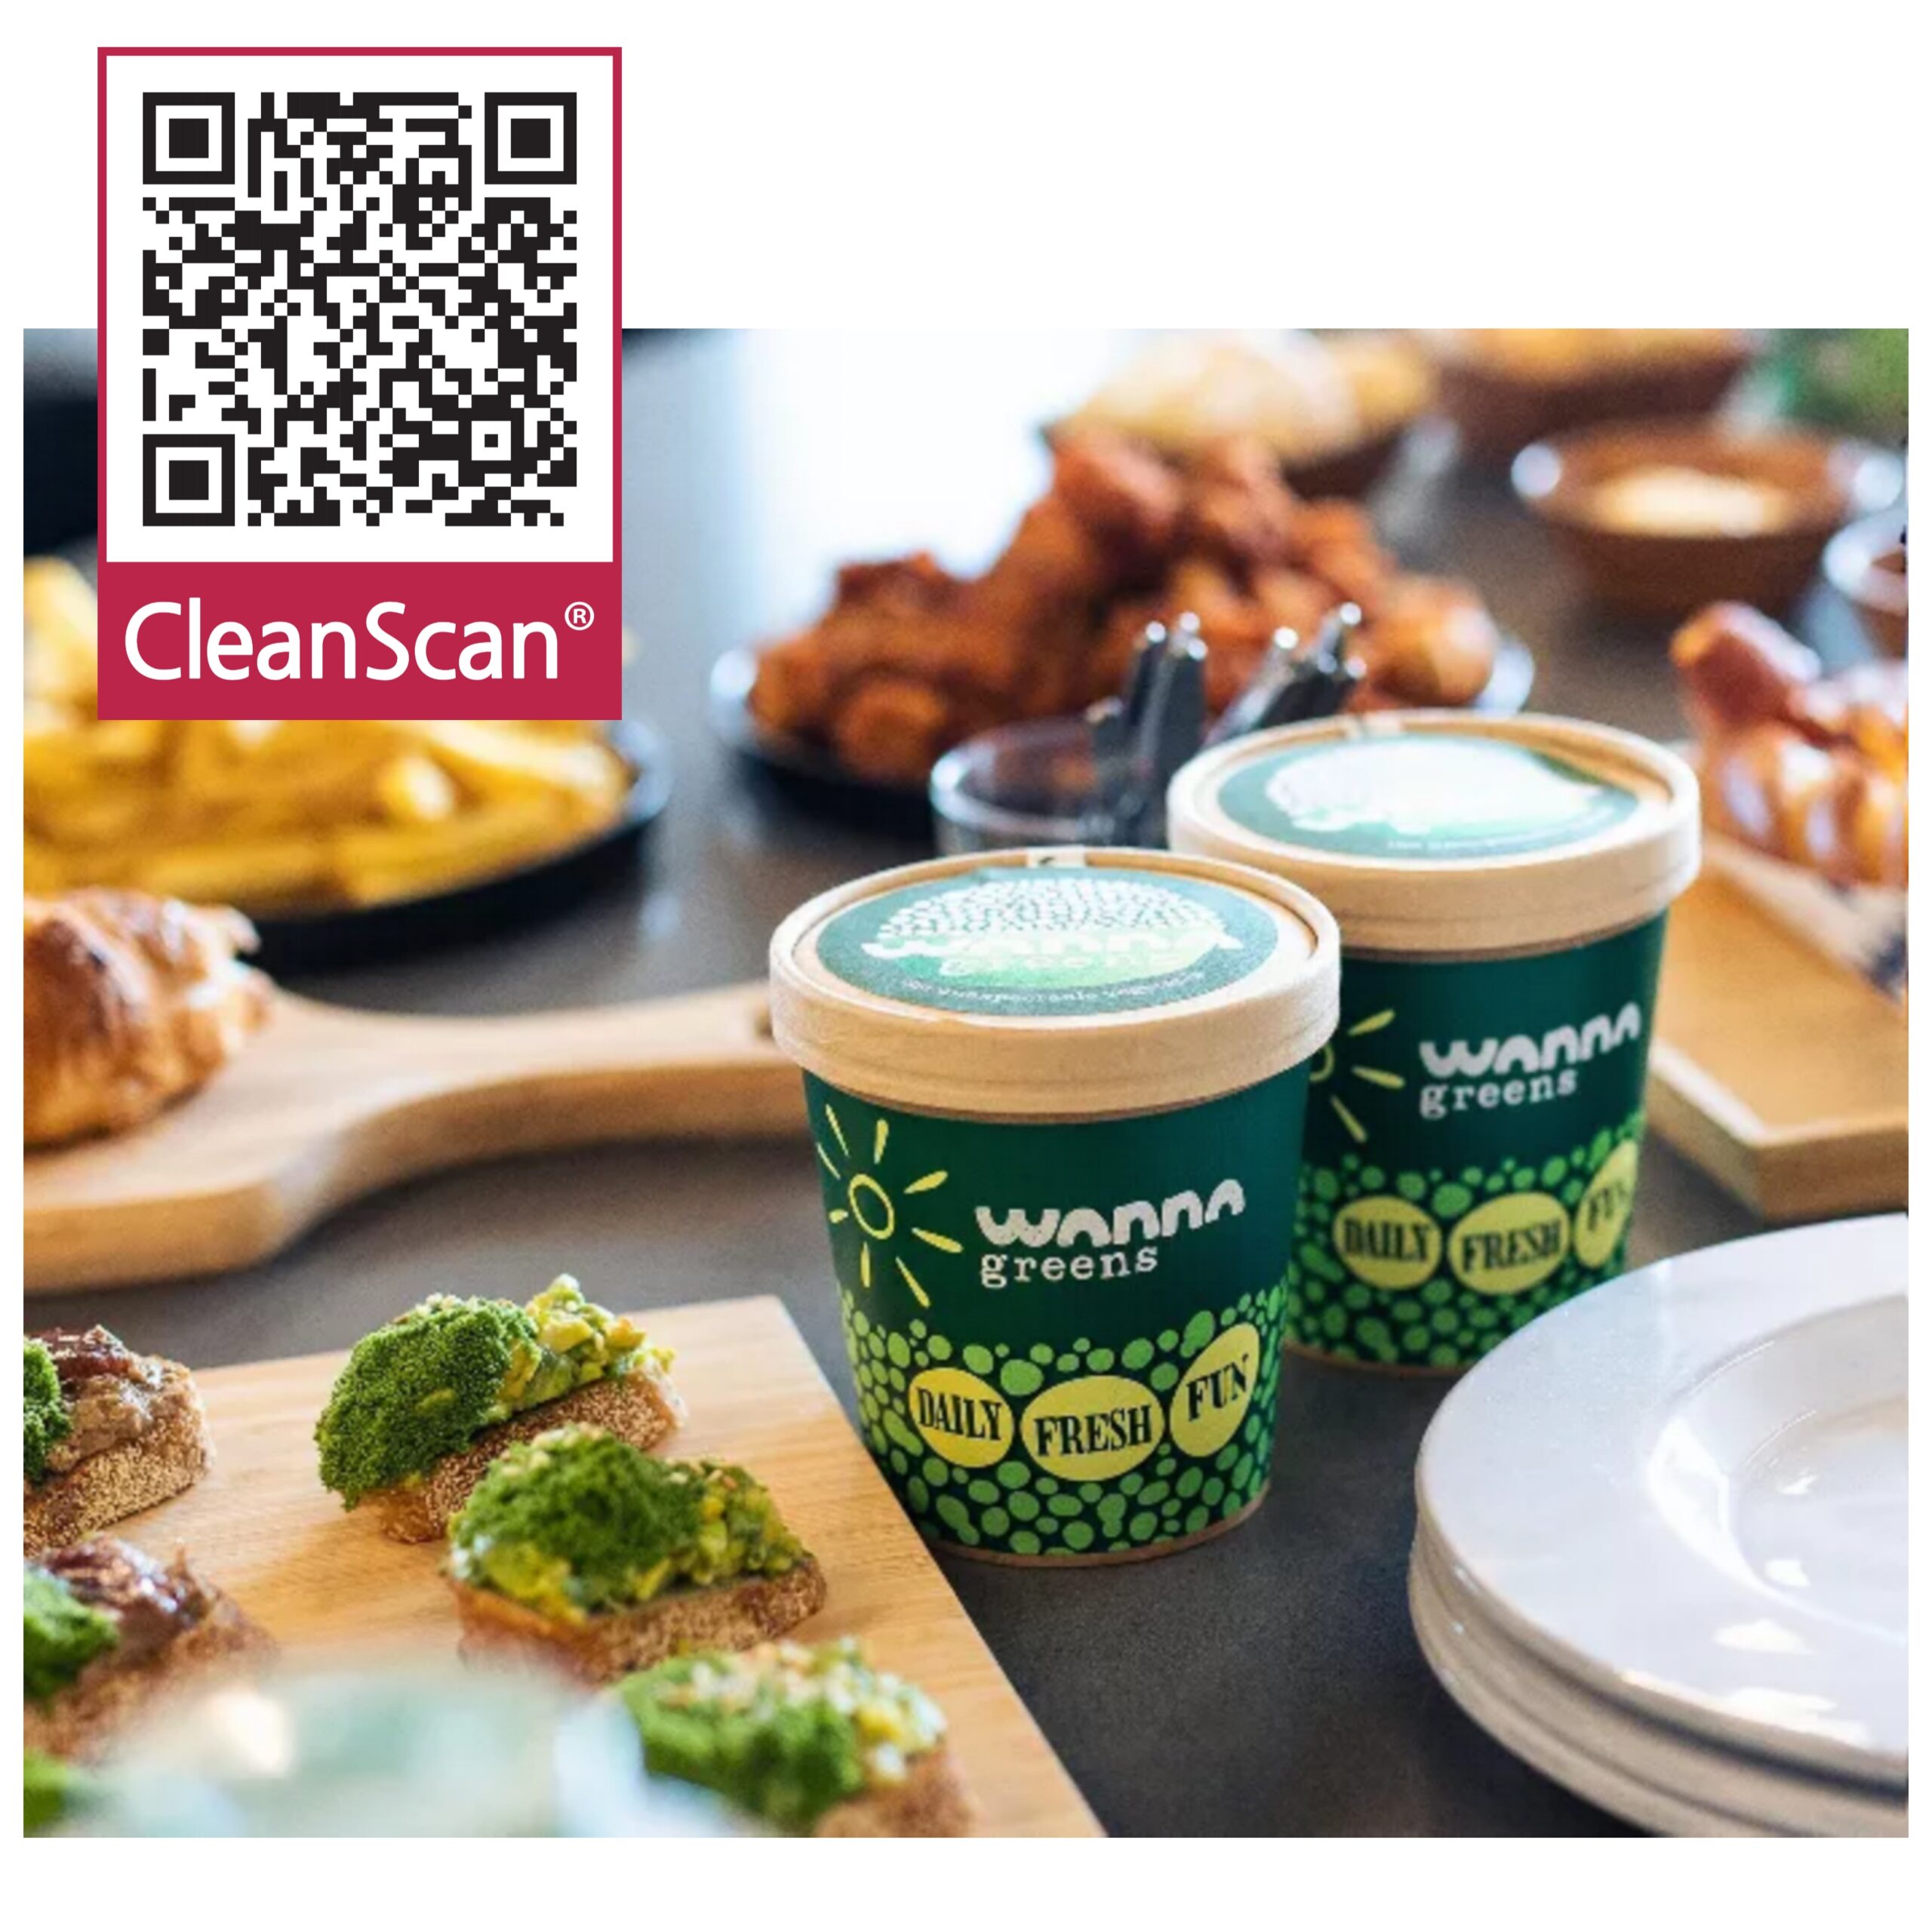 Groundbreaking Toxic Chemical Certification CleanScan Enables First Brand GreenOnyx to Reach New Levels of Transparency